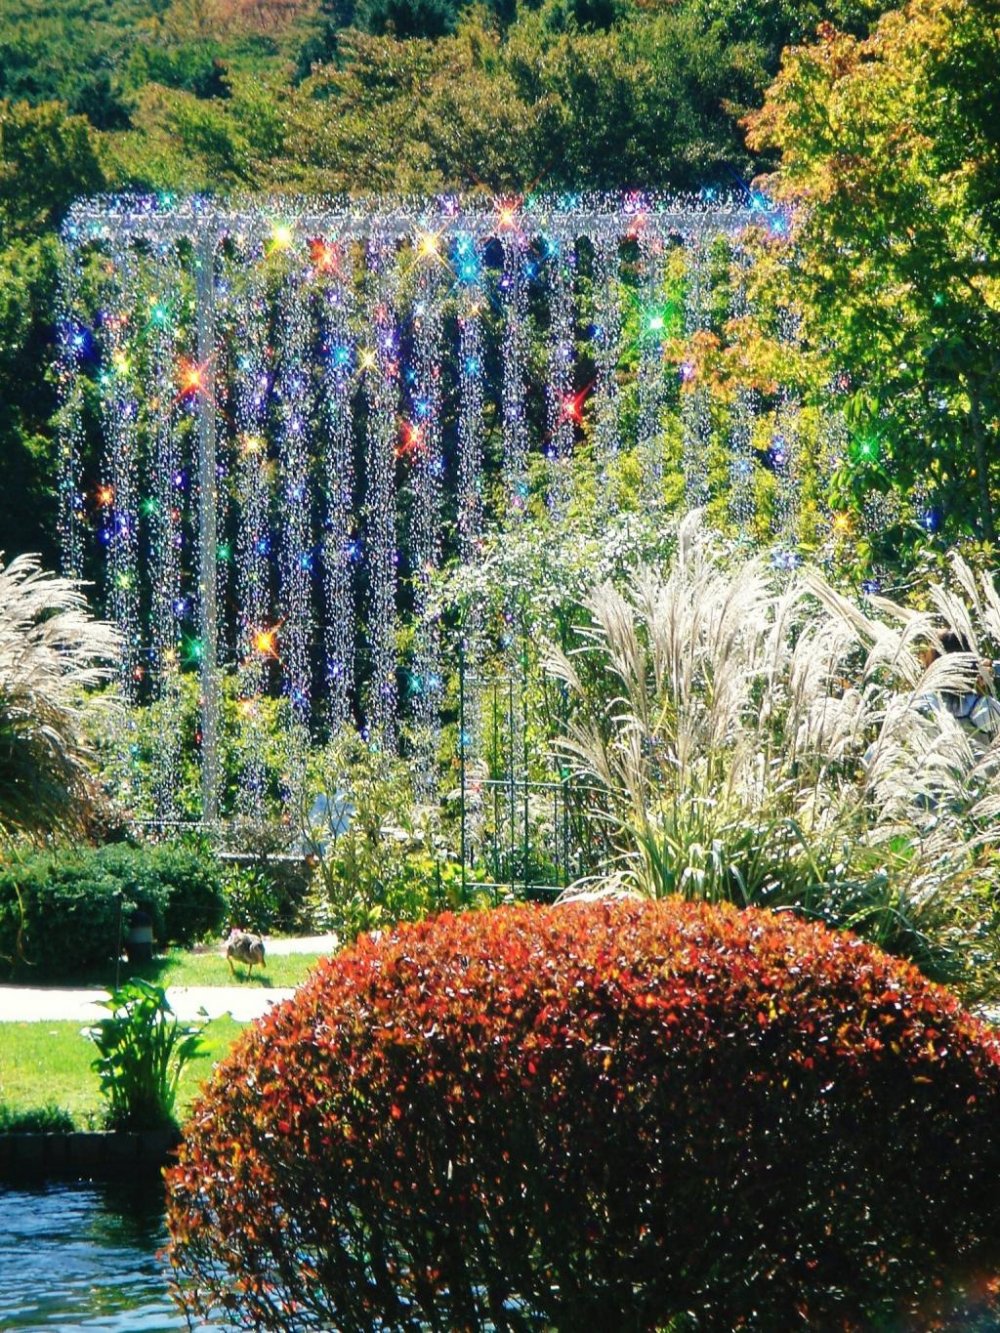 One of the seasonal glass outdoor exhibits